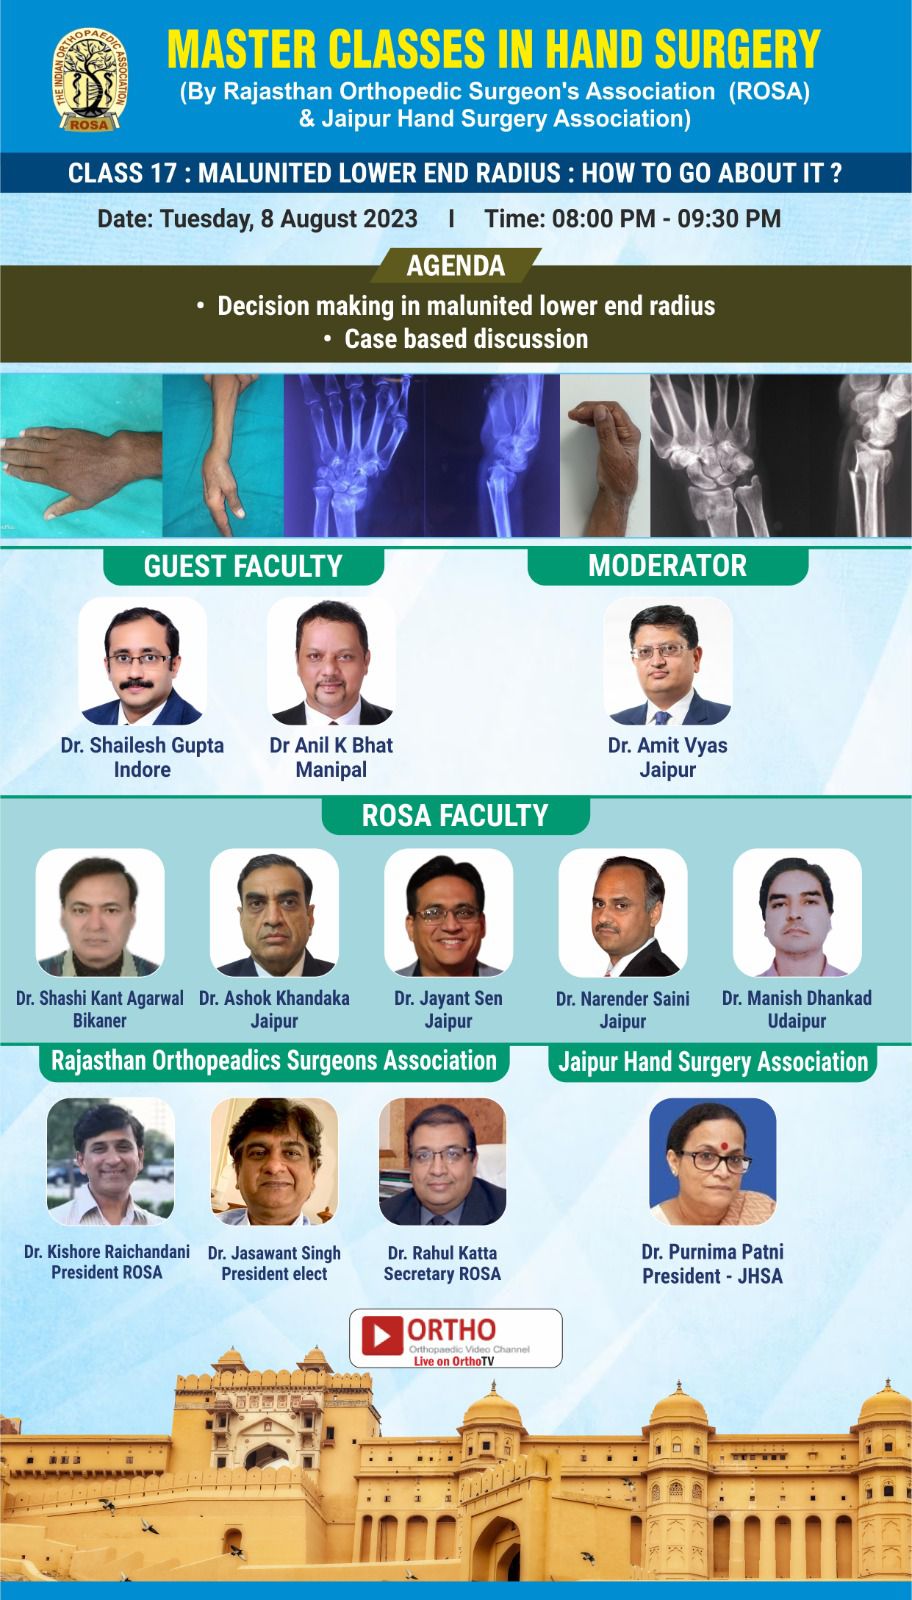 MASTER CLASSES IN HAND SURGERY - CLASS 17 : MALUNITED LOWER END RADIUS: HOW TO GO ABOUT IT?